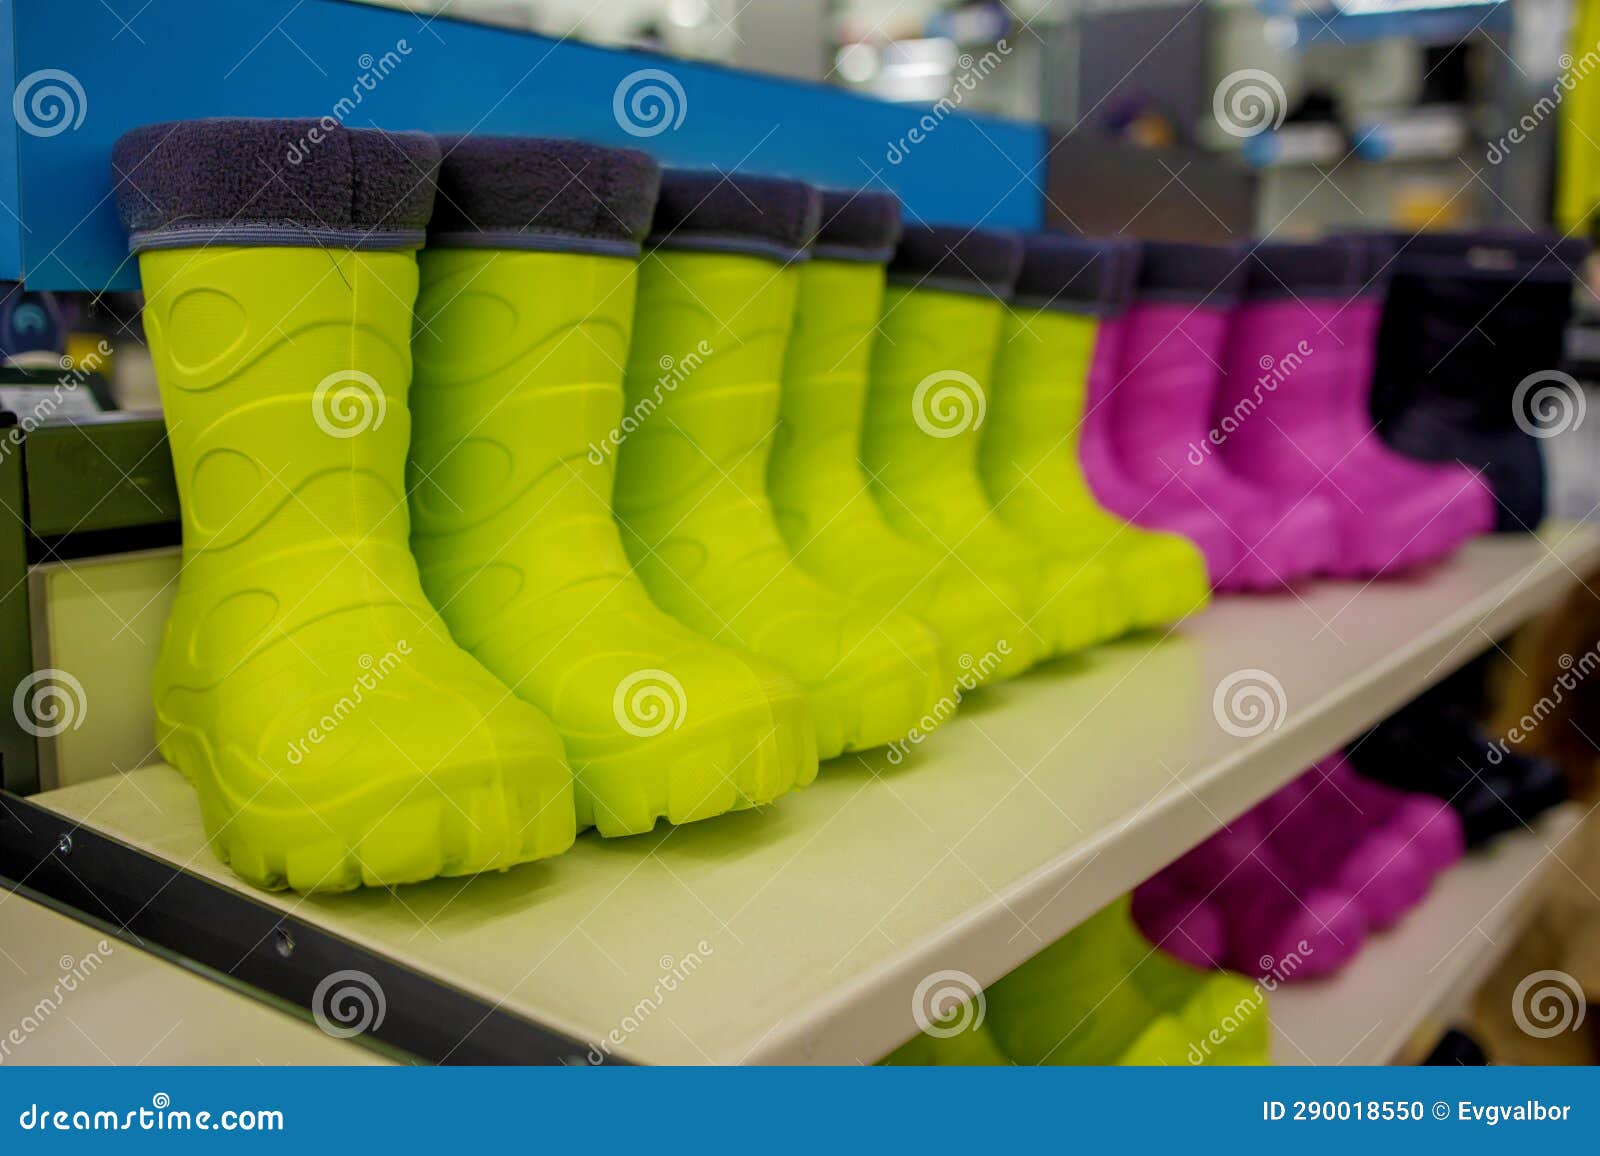 Close-up of Children S Rubber Boots on the Shelf in the Store. Shoe ...